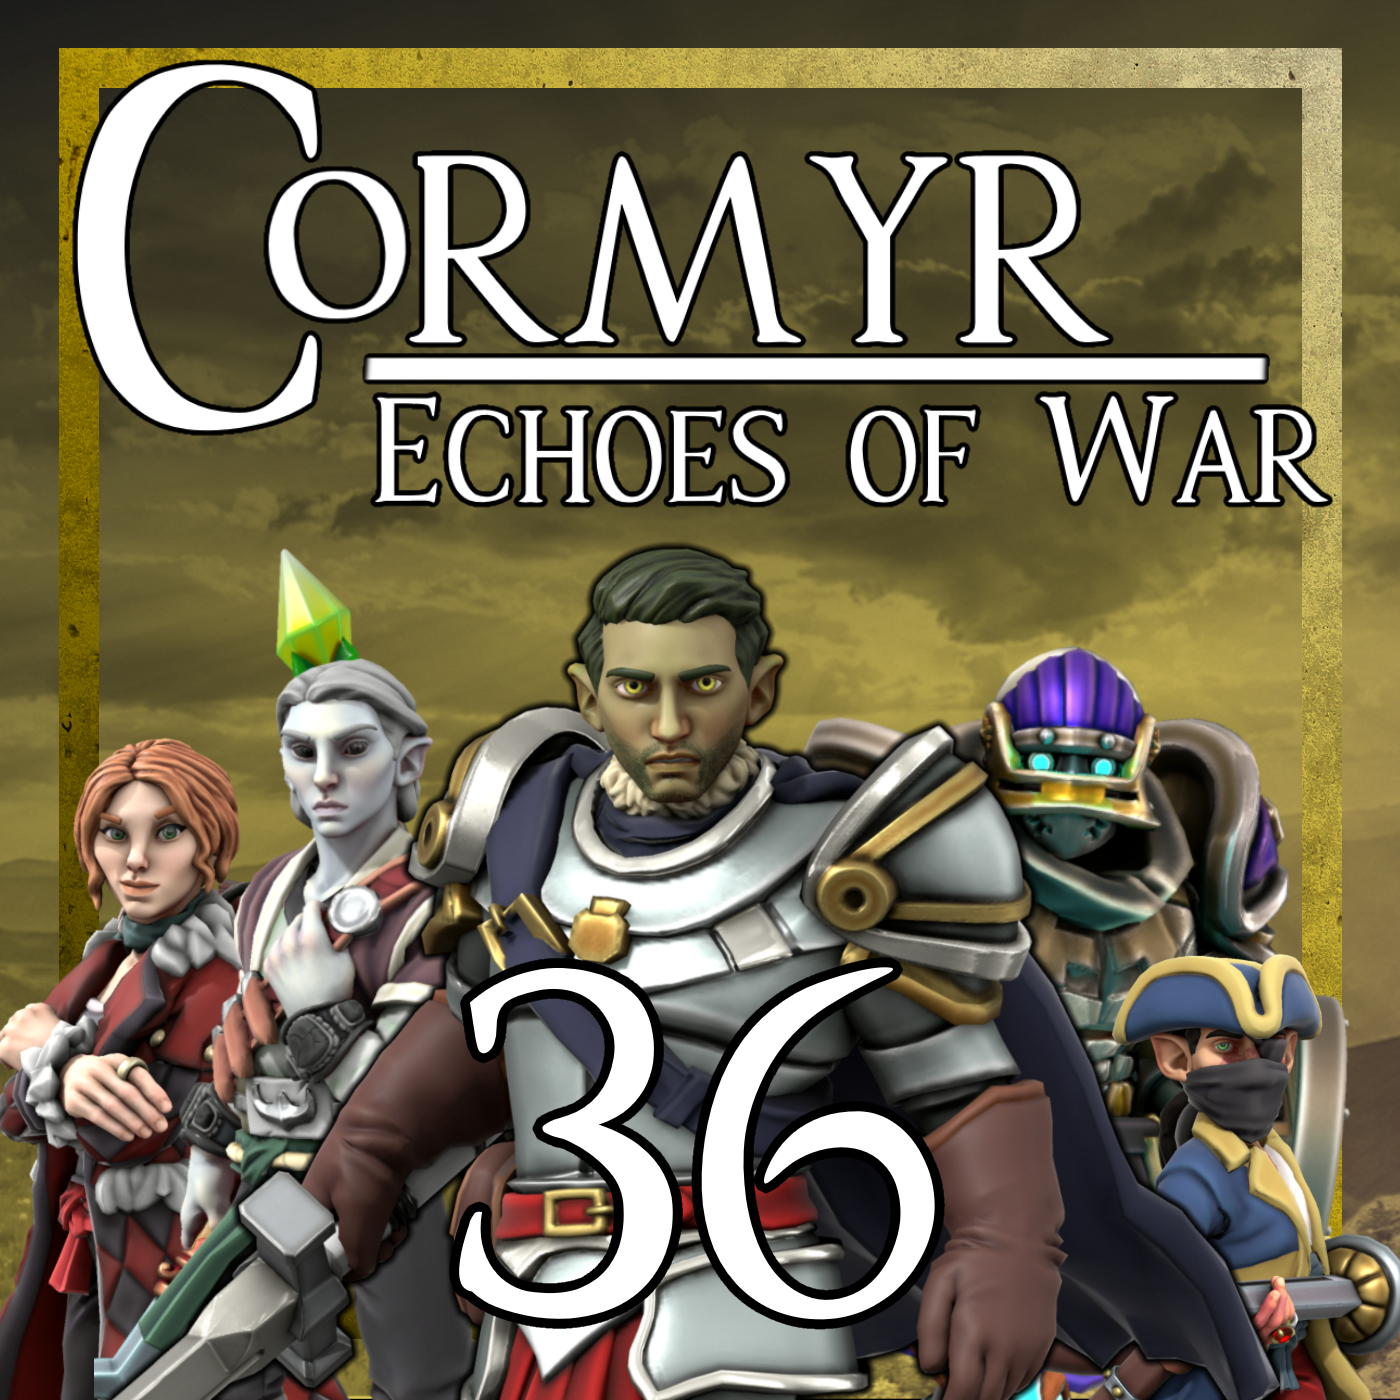 Cormyr: Echoes of War - Ep. 36 - Warriors in Arms